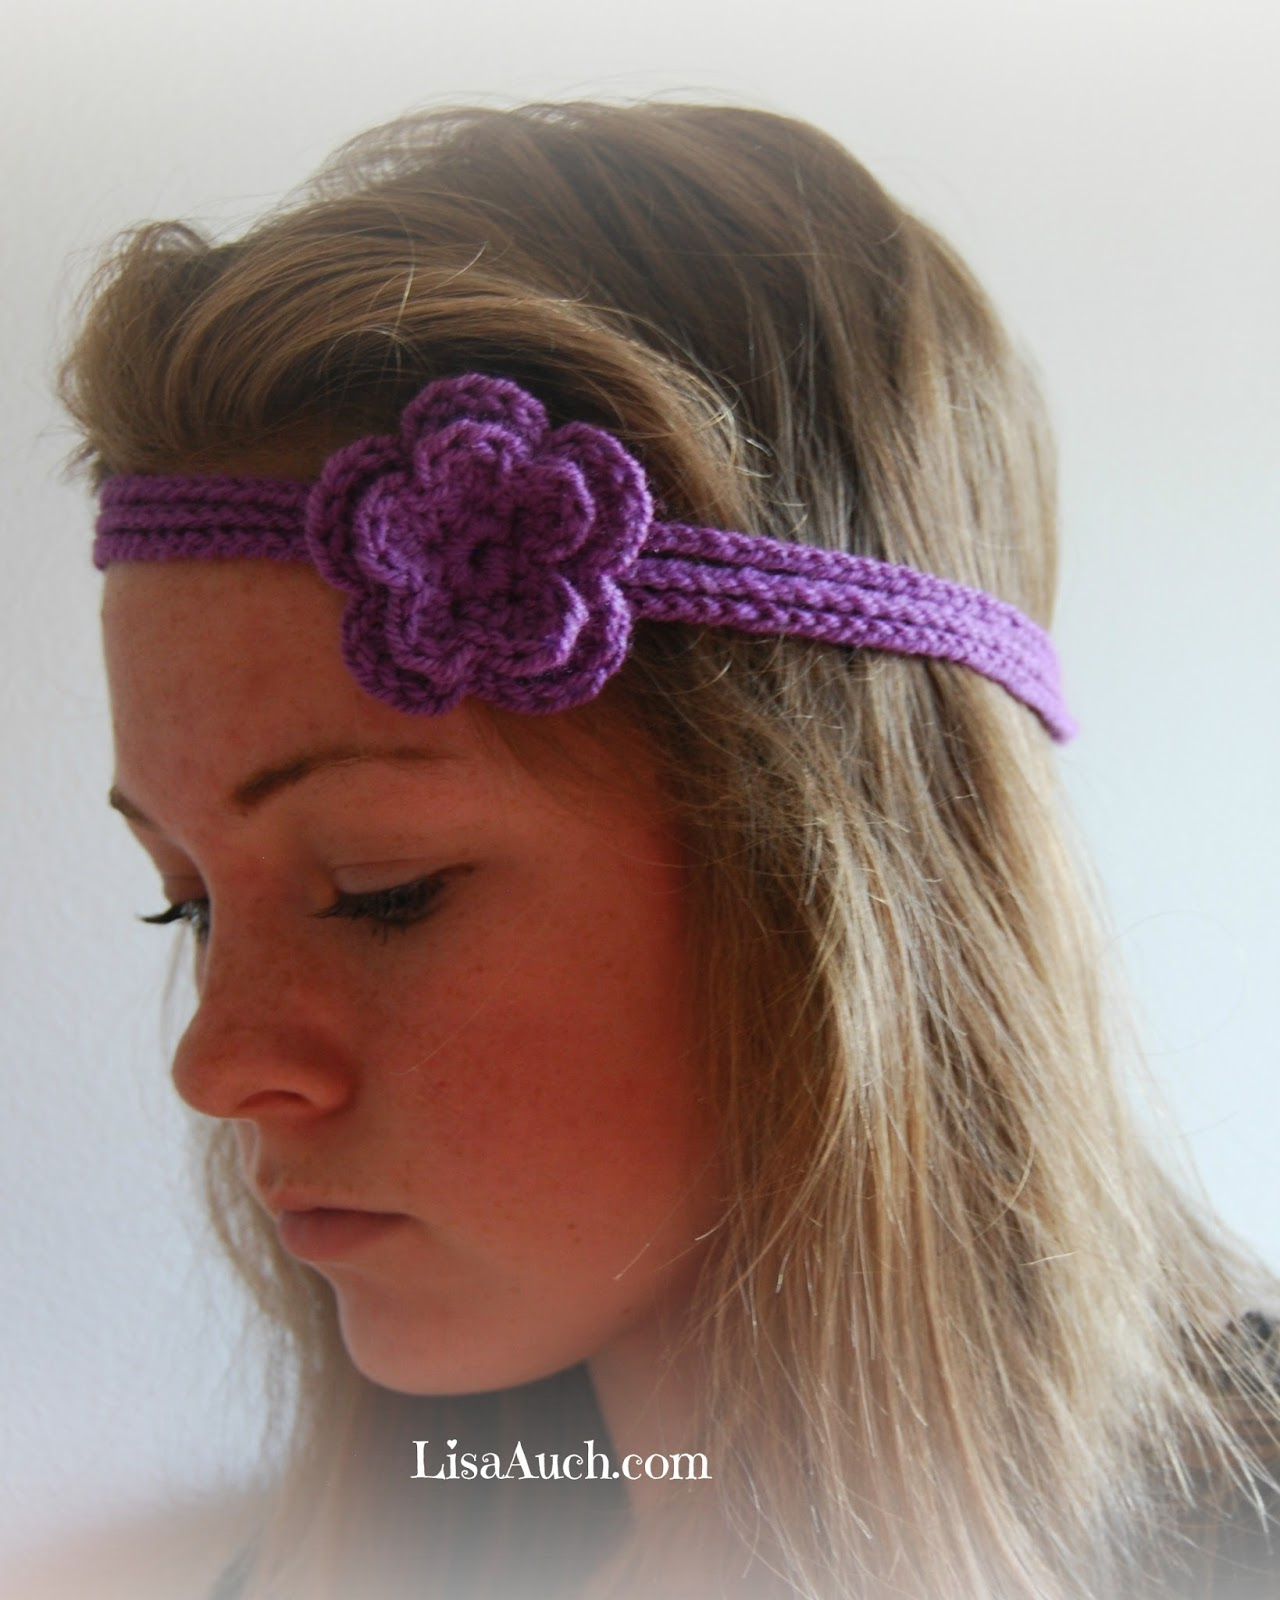 Crochet Headband With Flower Pattern Free Crochet Patterns And Designs Lisaauch How To Crochet A